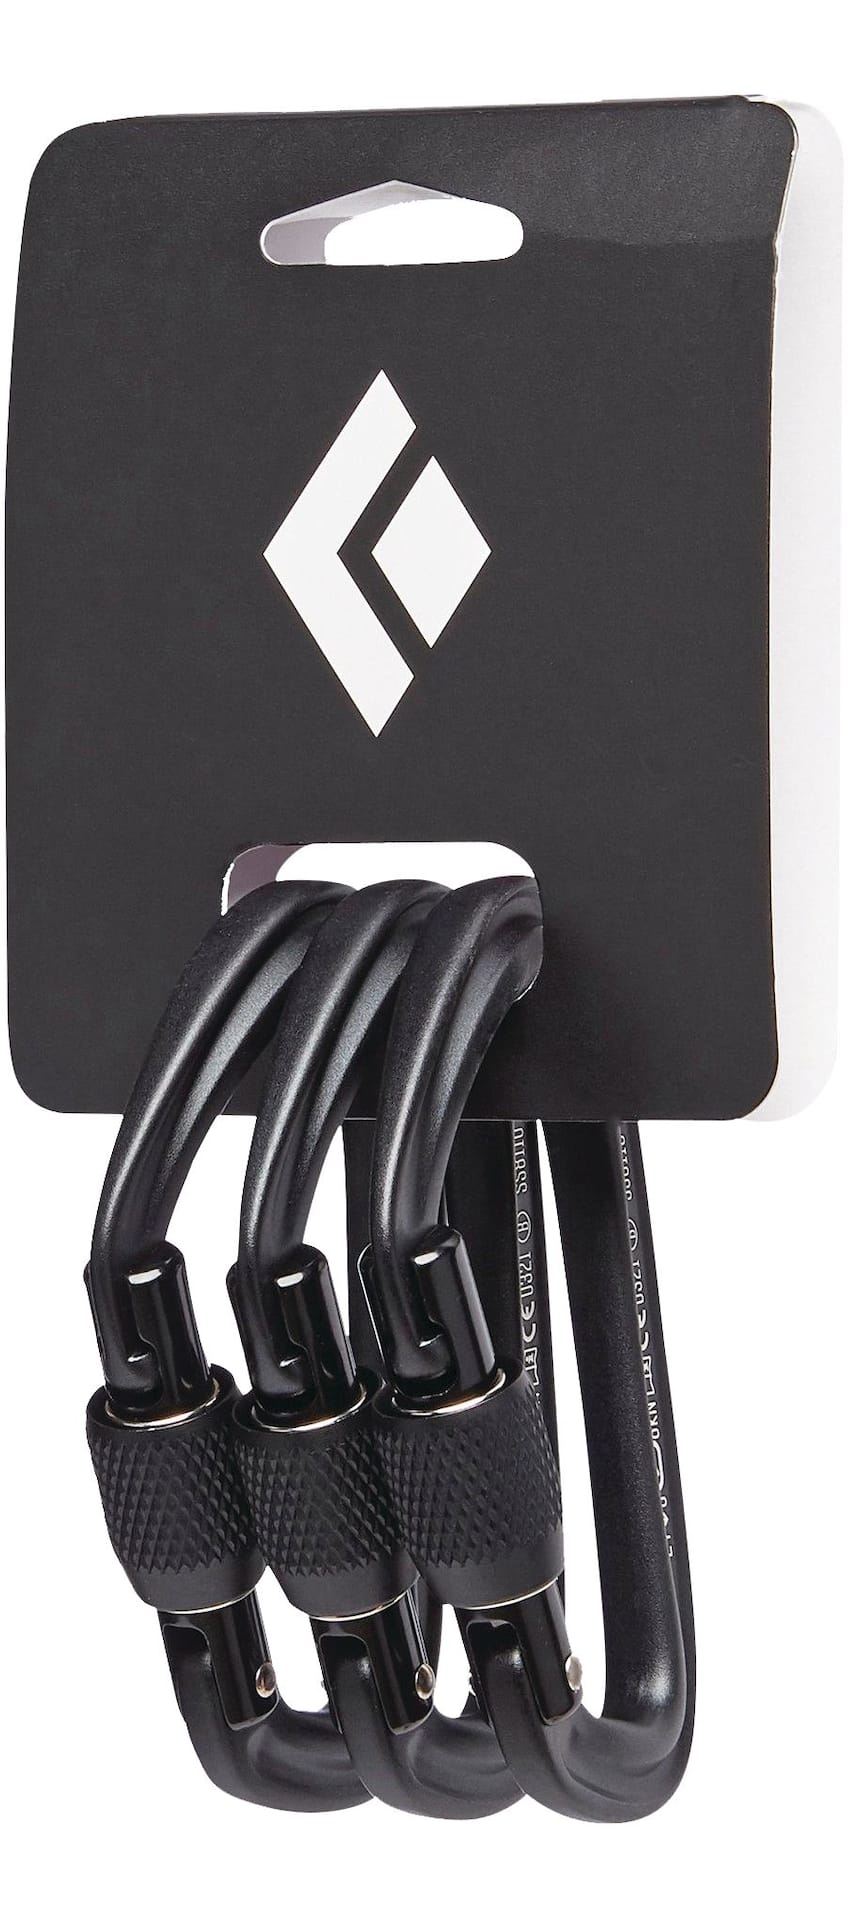 Black Diamond Hotforge Screwgate Carabiner Clips For Camping, Hiking &  Outdoor Sports, 3-pk